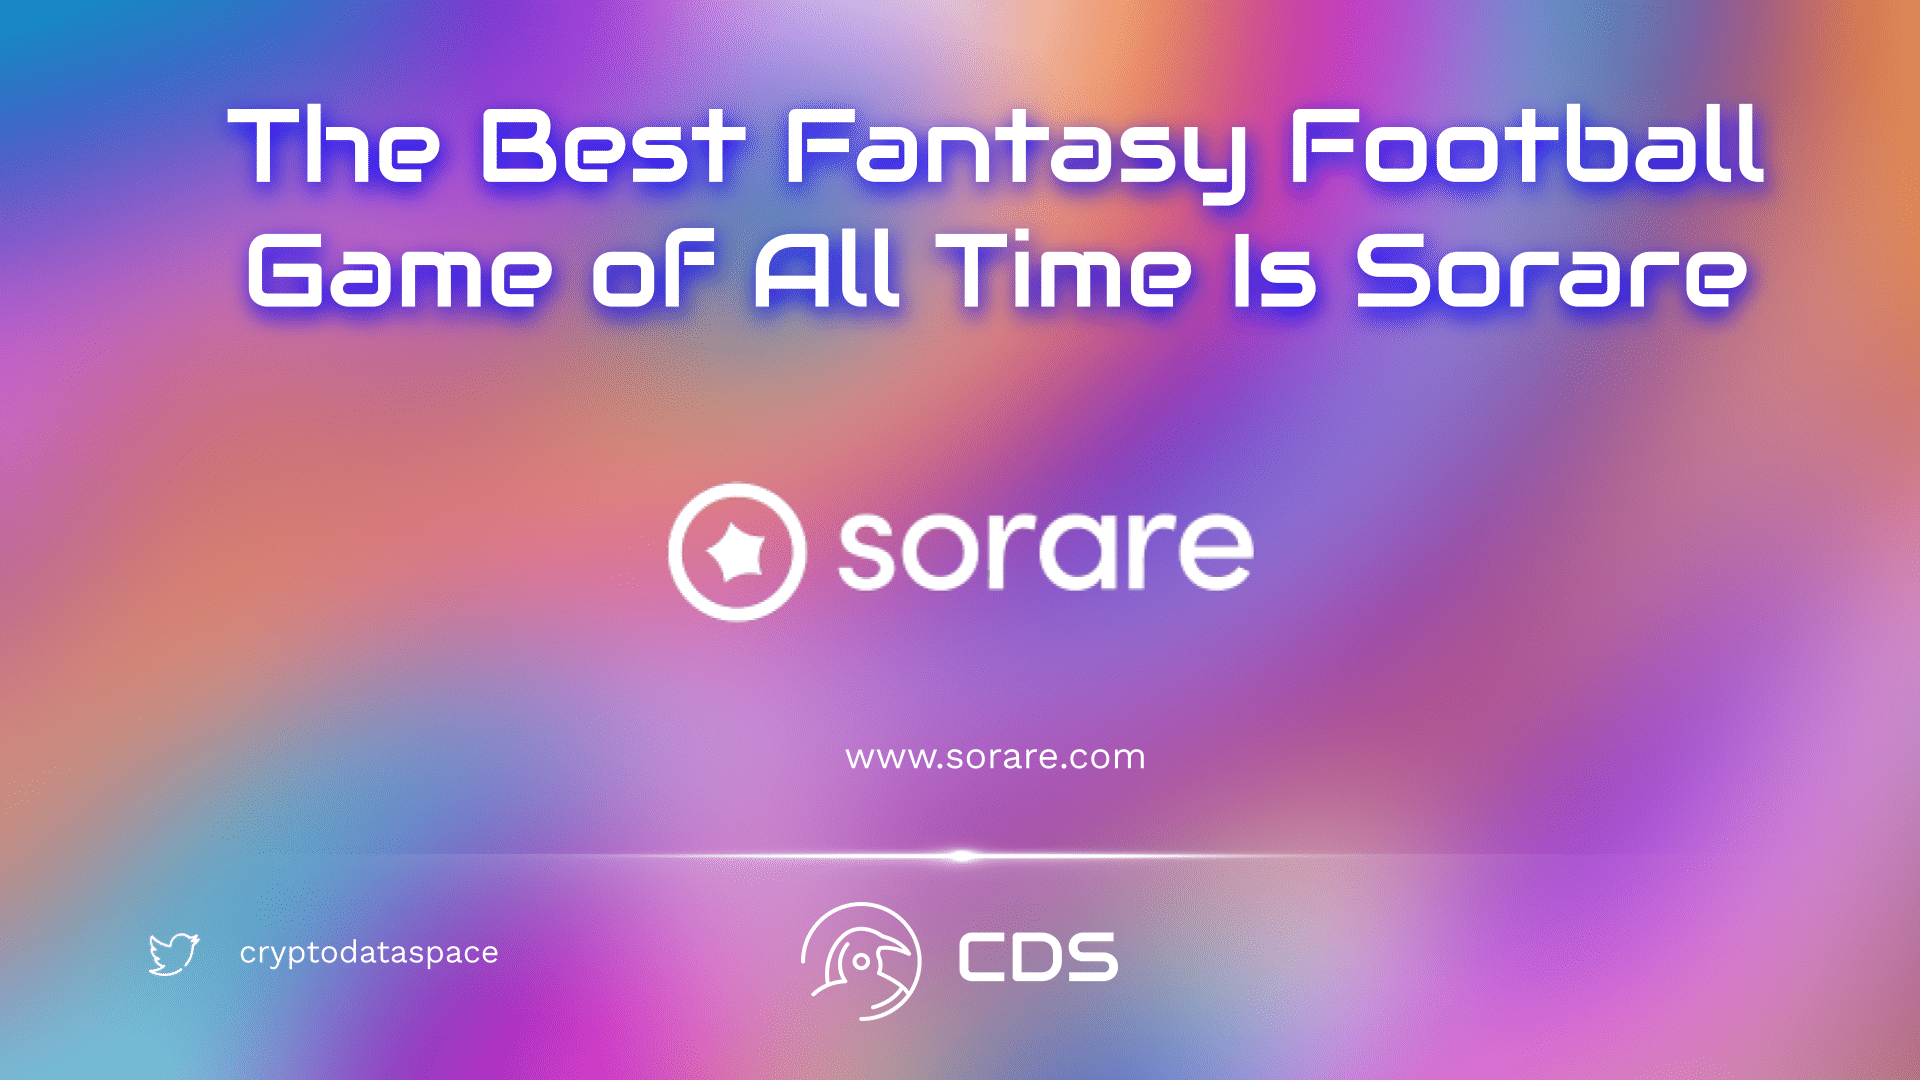 The Best Fantasy Football Game of All Time Is Sorare